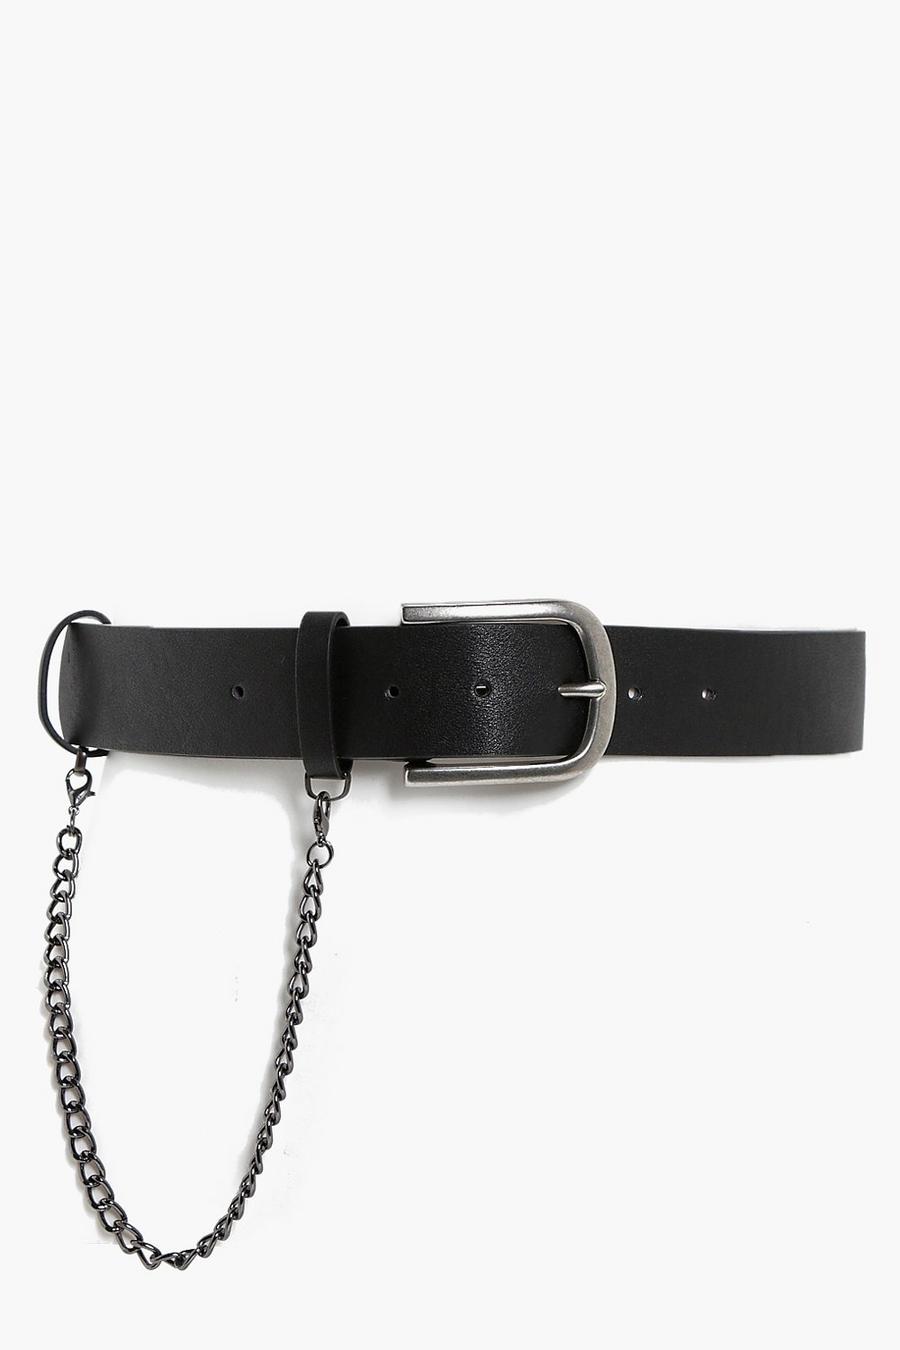 Black Chunky Gold Chain Buckle Belt With Key